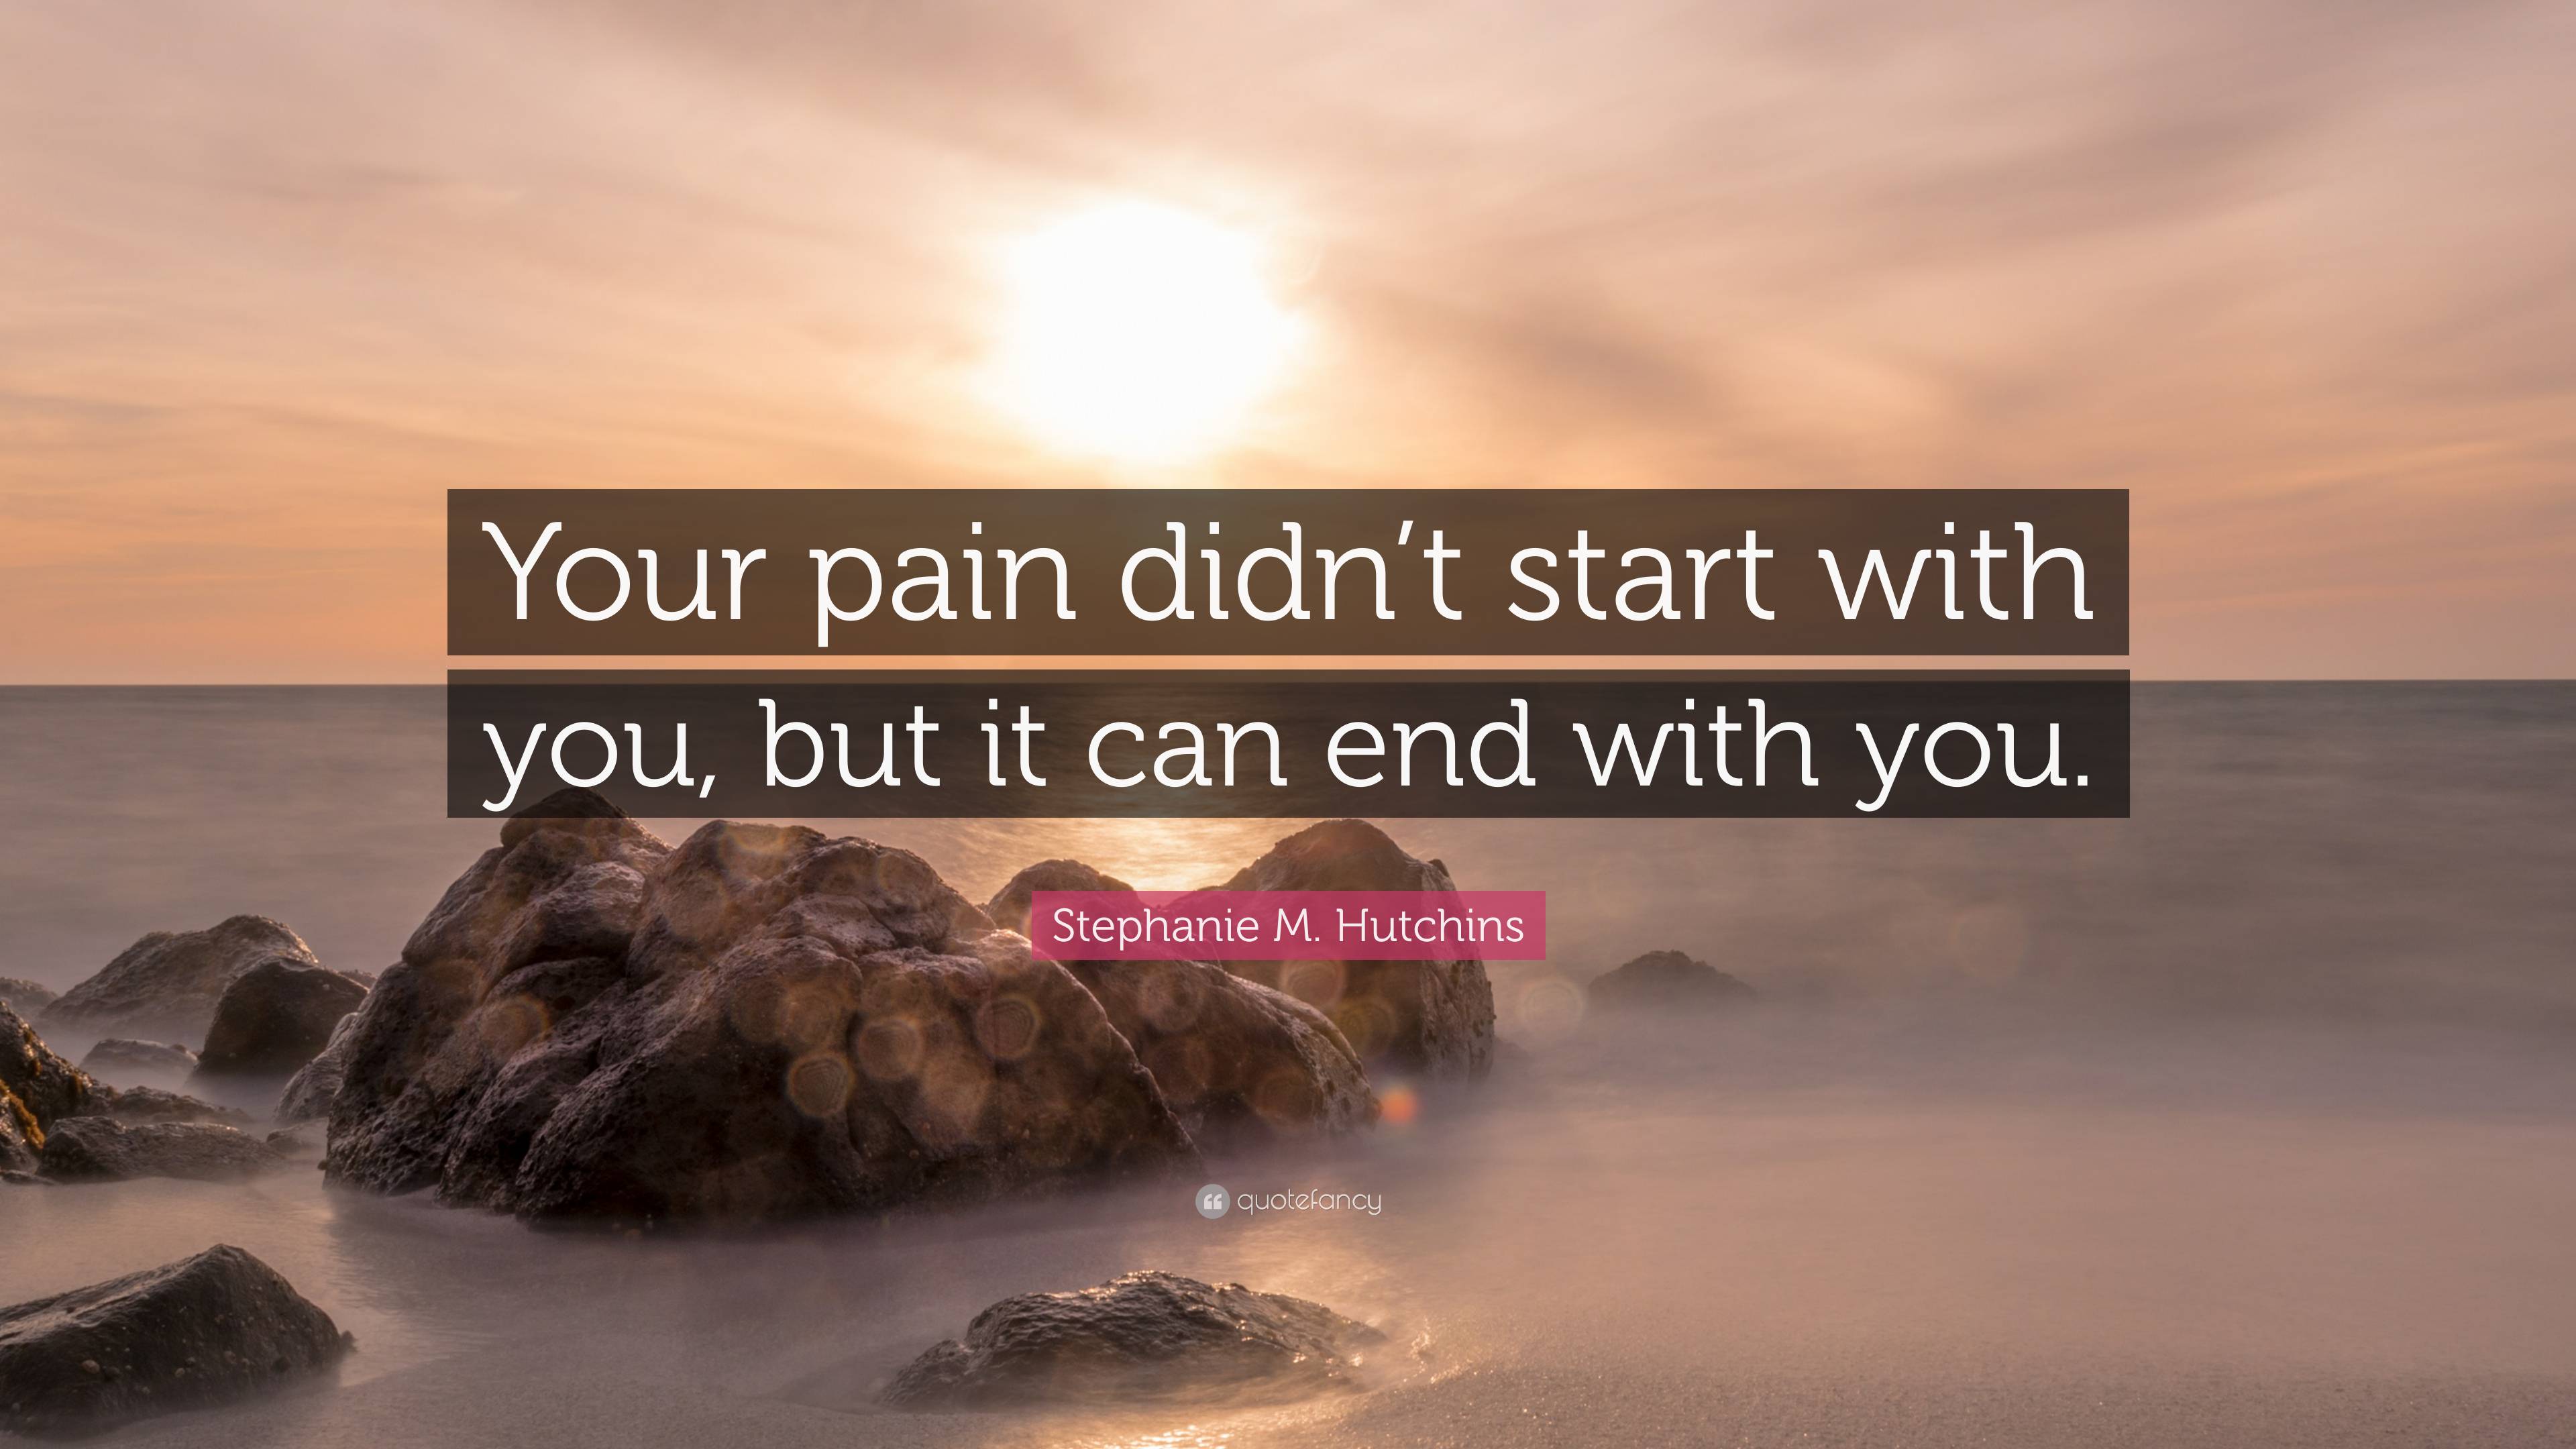 Stephanie M. Hutchins Quote: “Your pain didn't start with you, but it can  end with